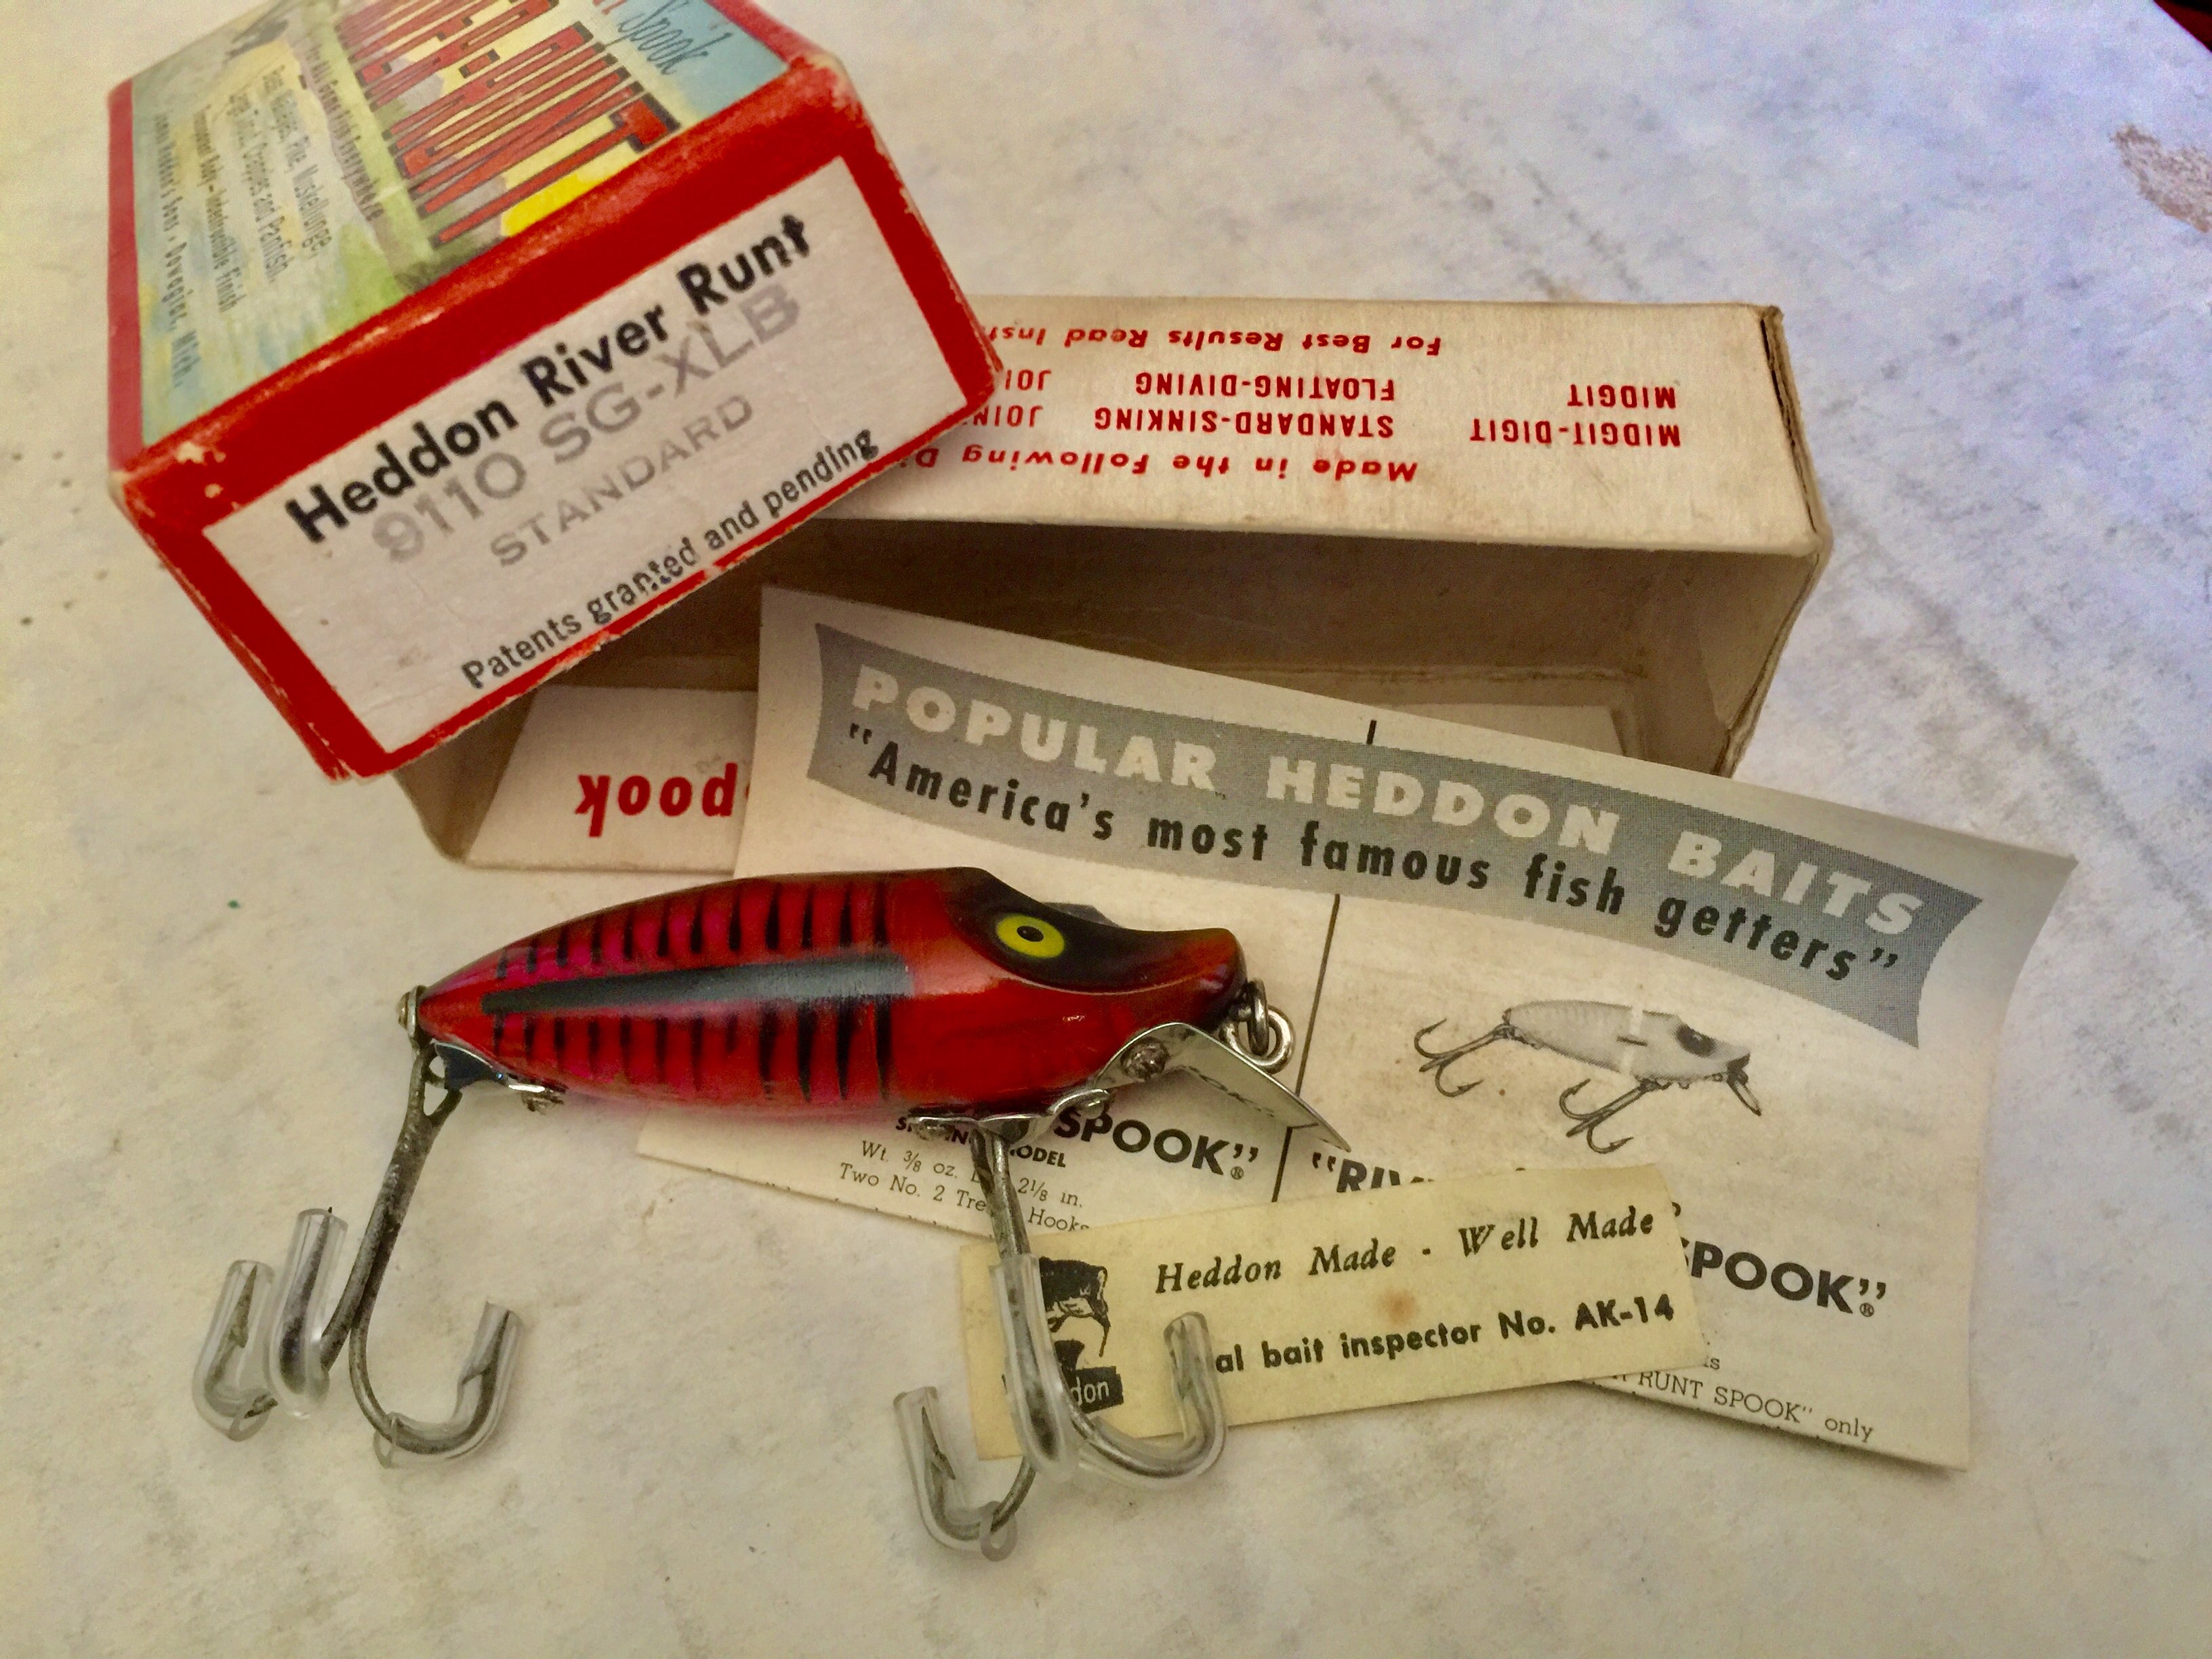 At Auction: Group of 14 Heddon River Runt Fishing Lures